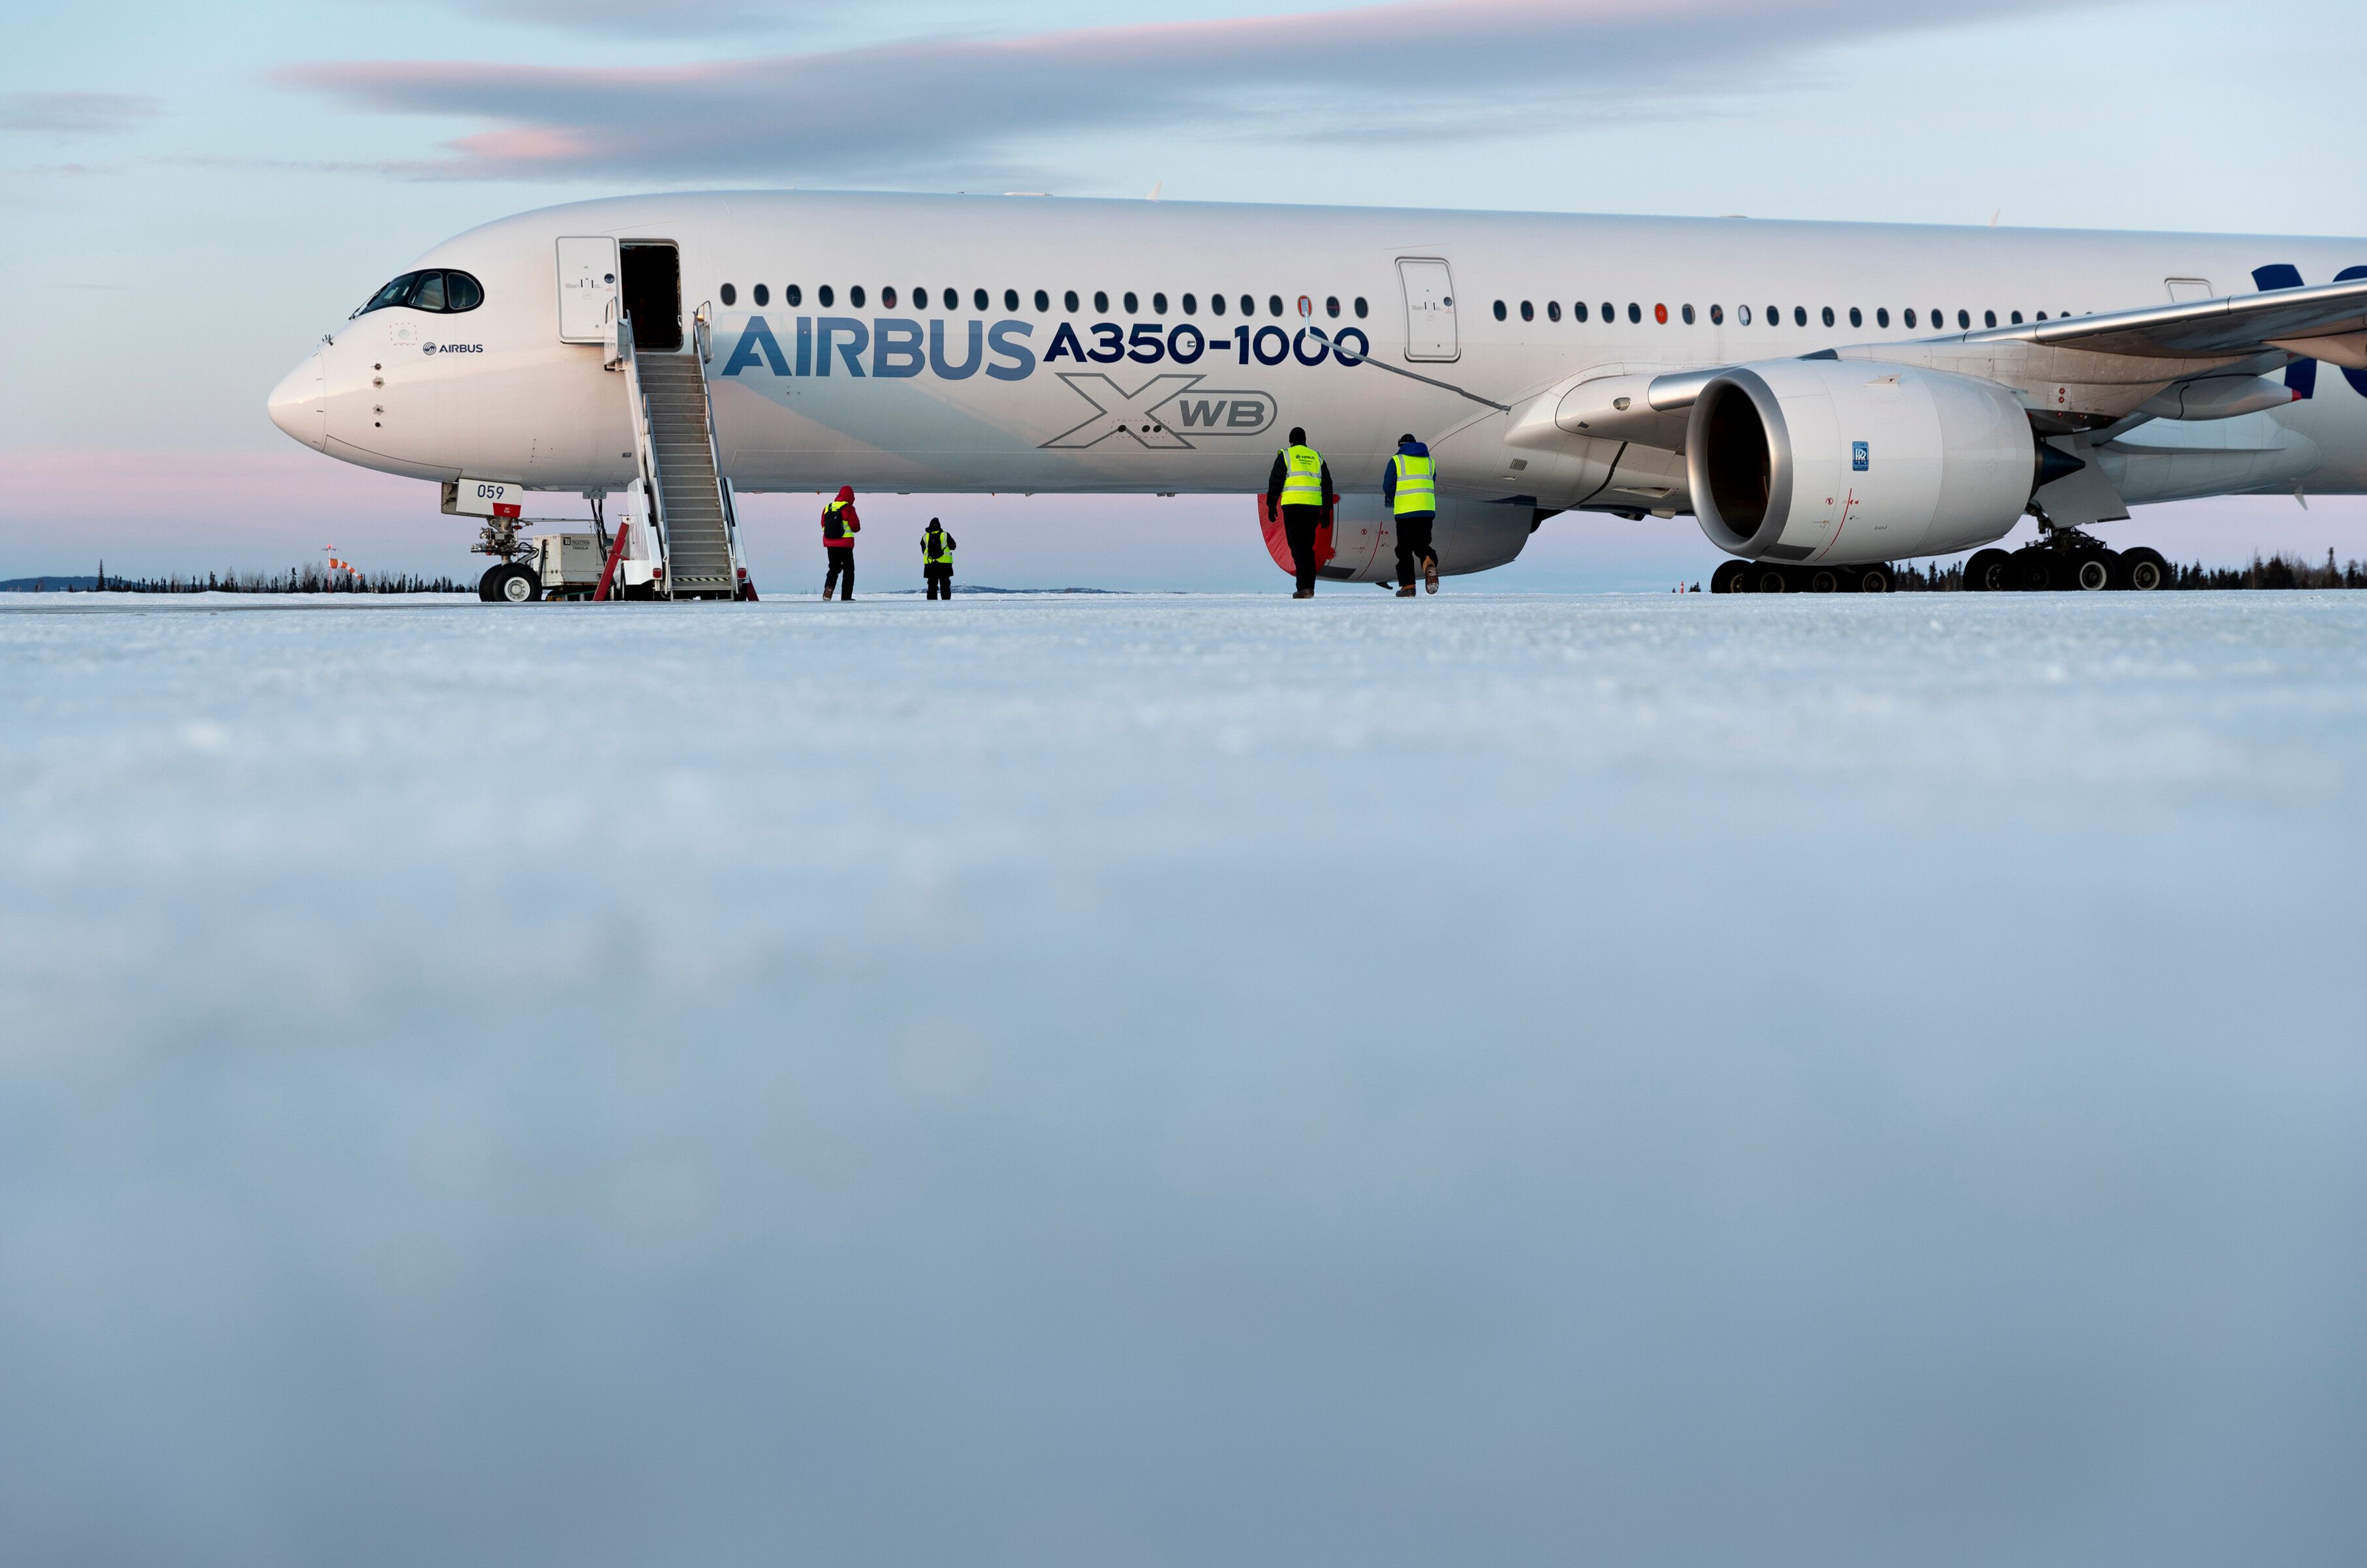 Airbus A350-1000 Cold Weather Testing